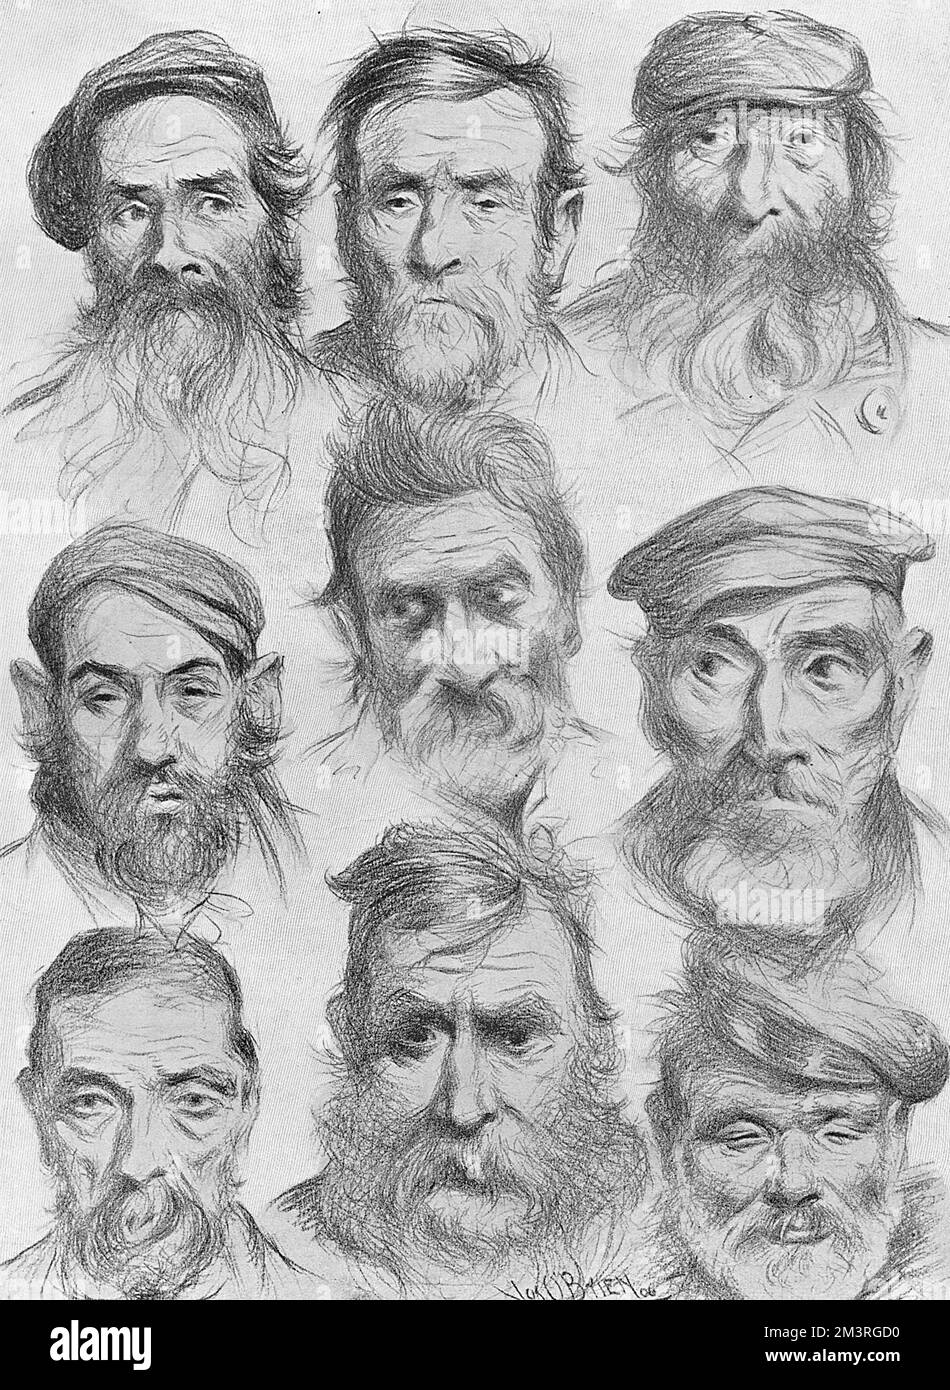 no goods or might be goods the faces of the night victims of our social system or of their own faults men of the under world character sketches of homeless men to be seen each night sleeping in the embankment area of london date 1909 2M3RGD0